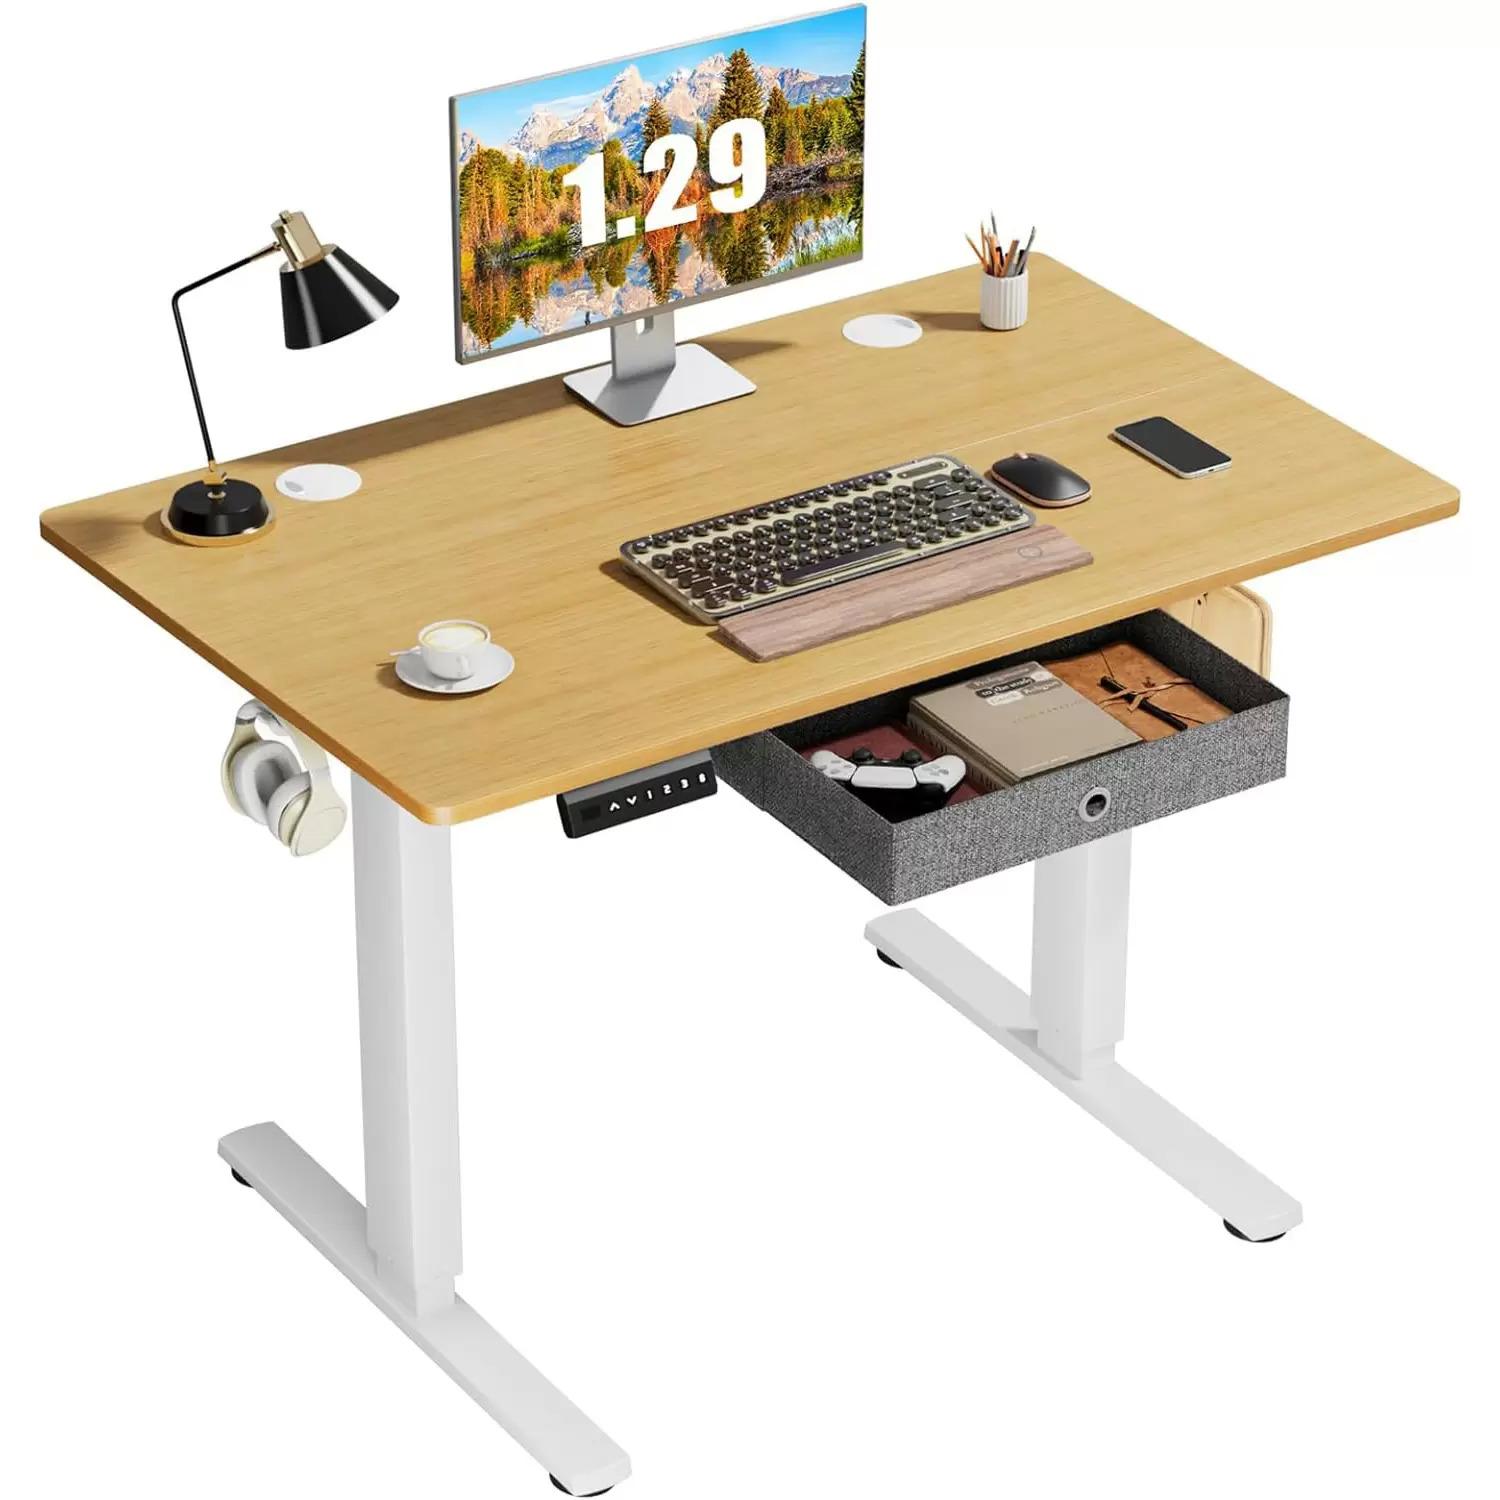 Sweetcrispy 40x24 Electric Adjustable Height Standing Desk for $77.75 Shipped